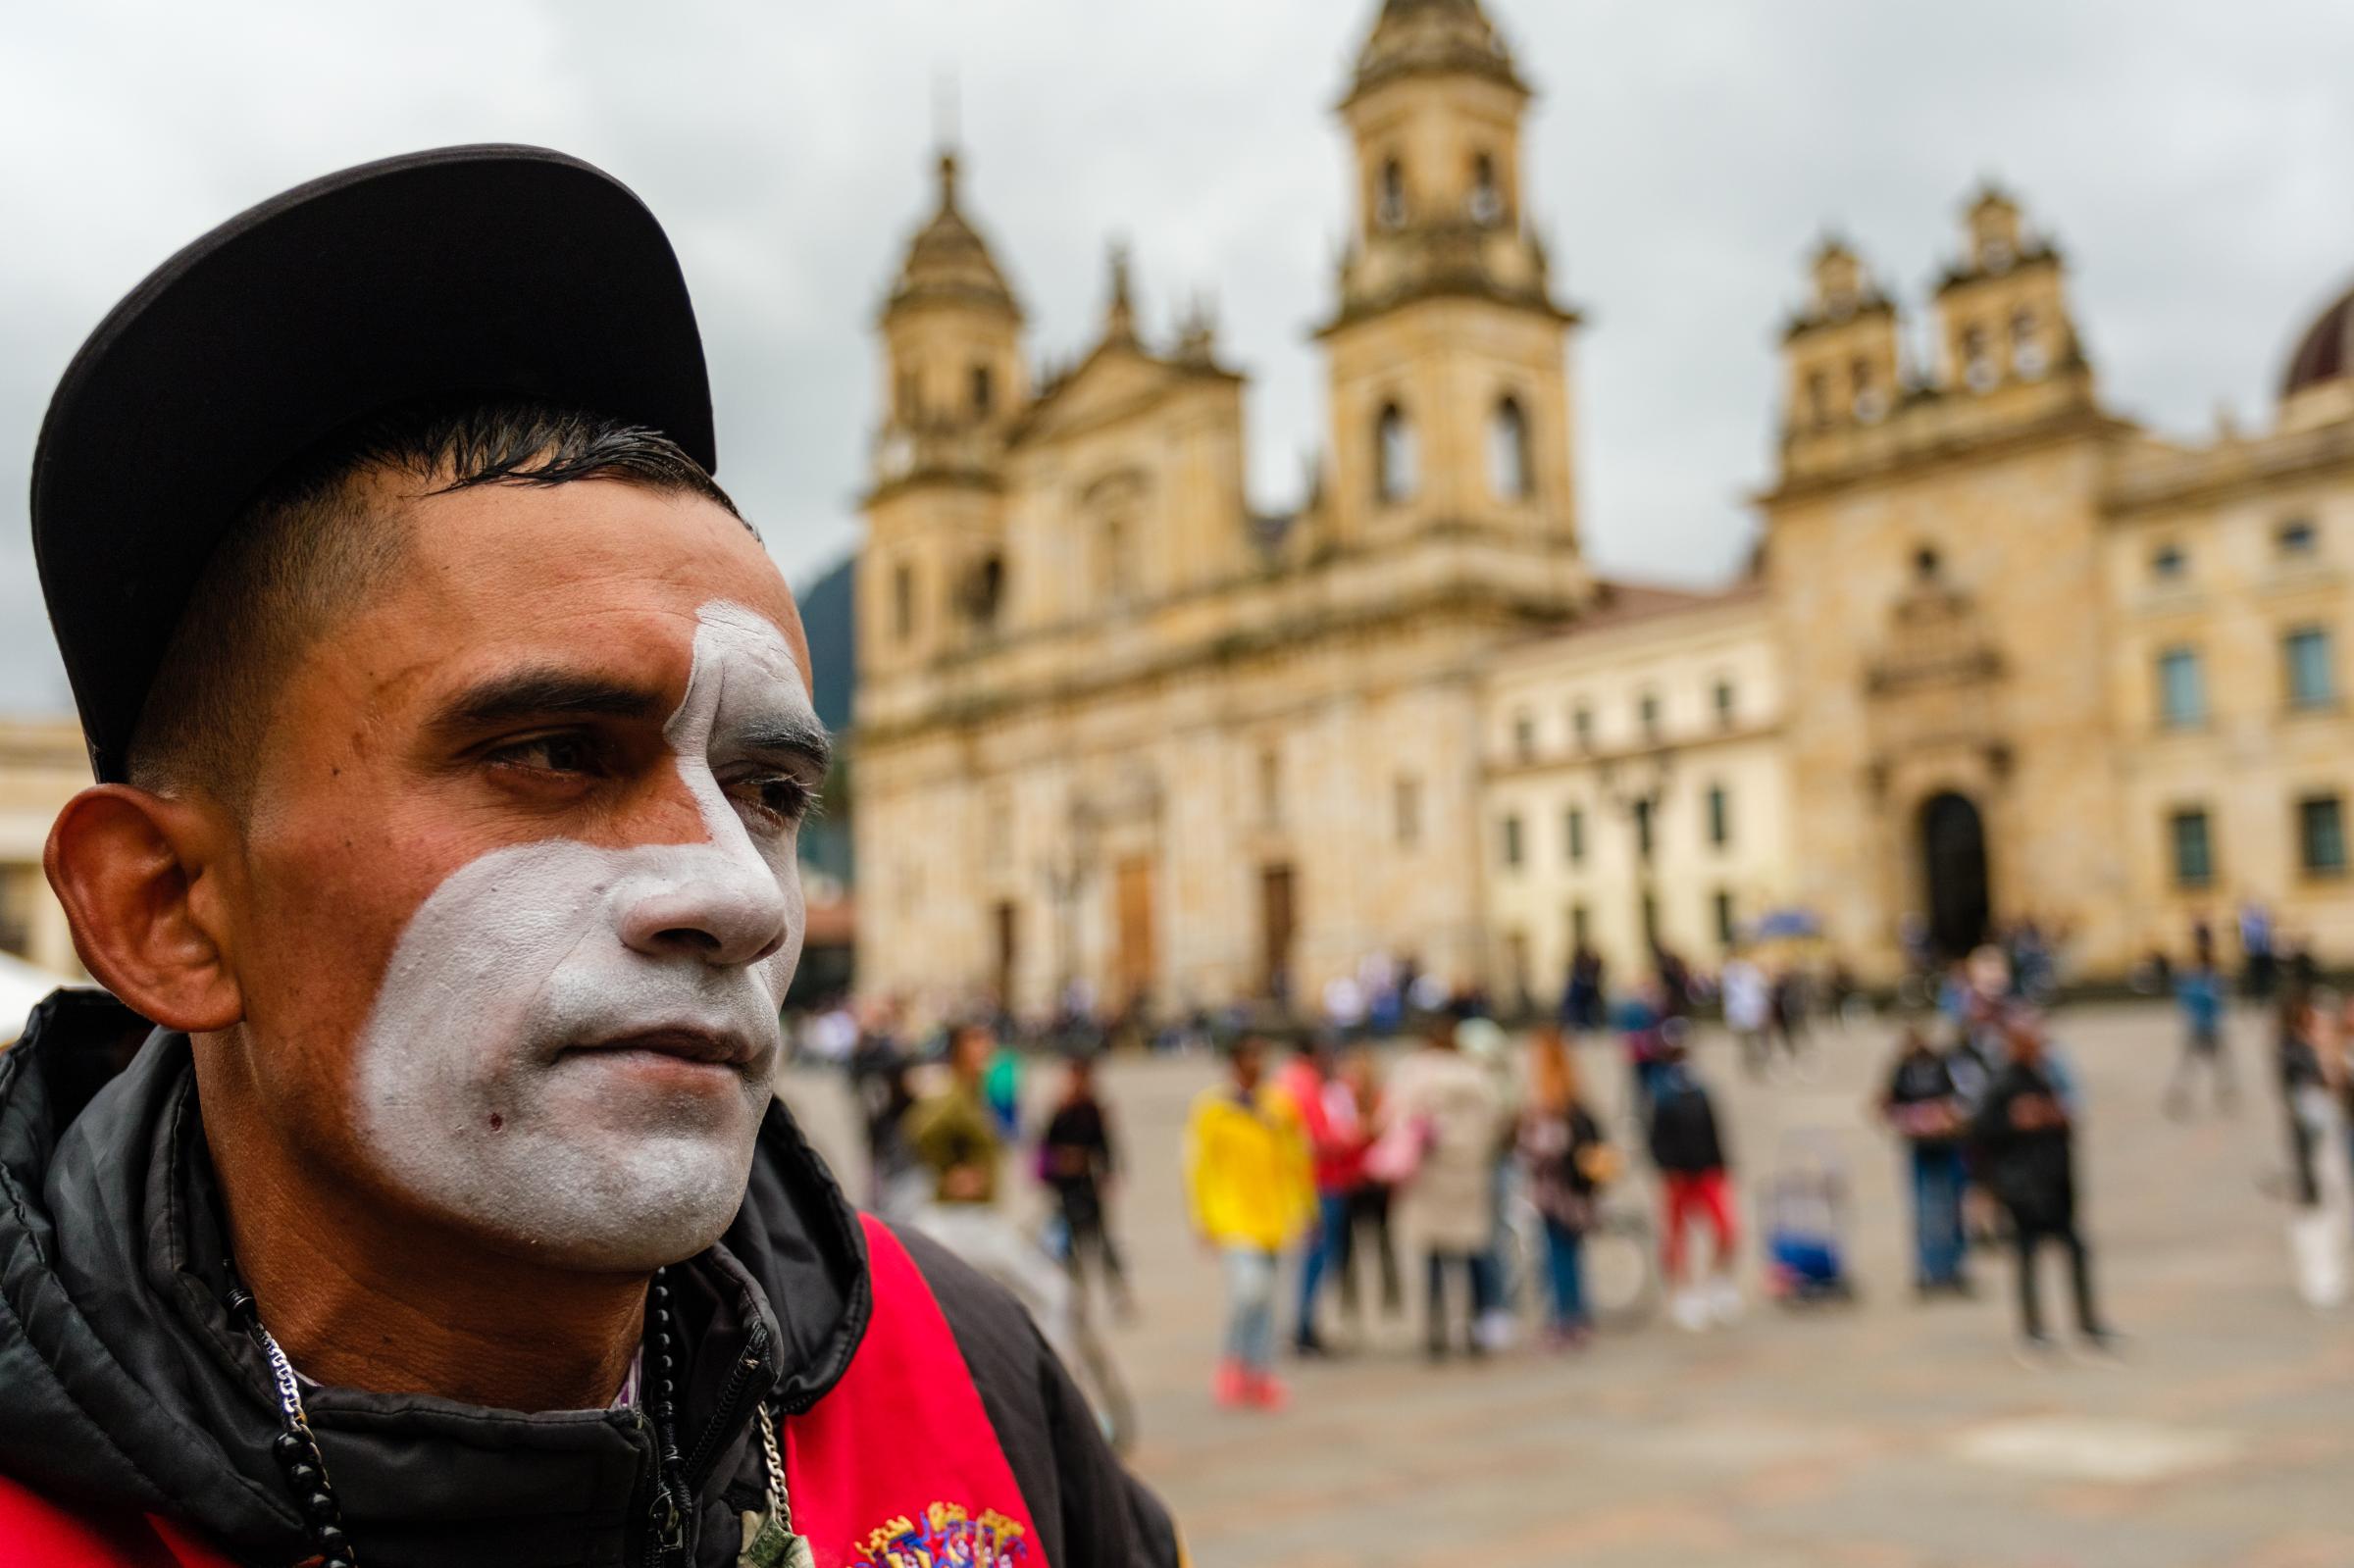 Colombian Indigenous Guardians Congress Rally - Indigenous Guardian Associations and other groups gather...